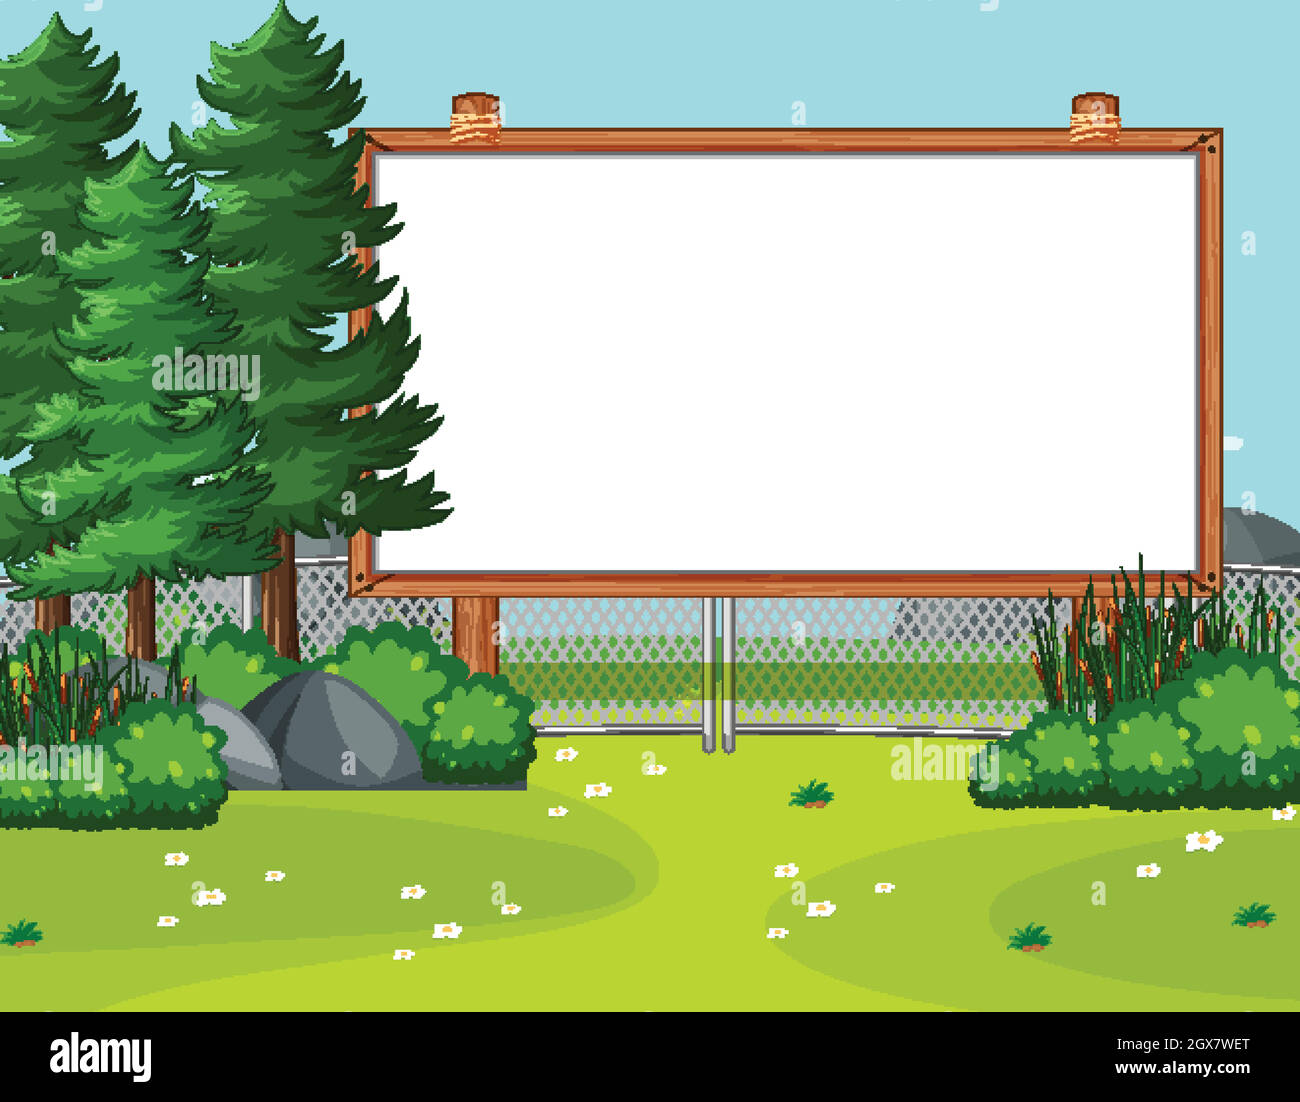 Blank wooden frame in nature park scene with pines Stock Vector